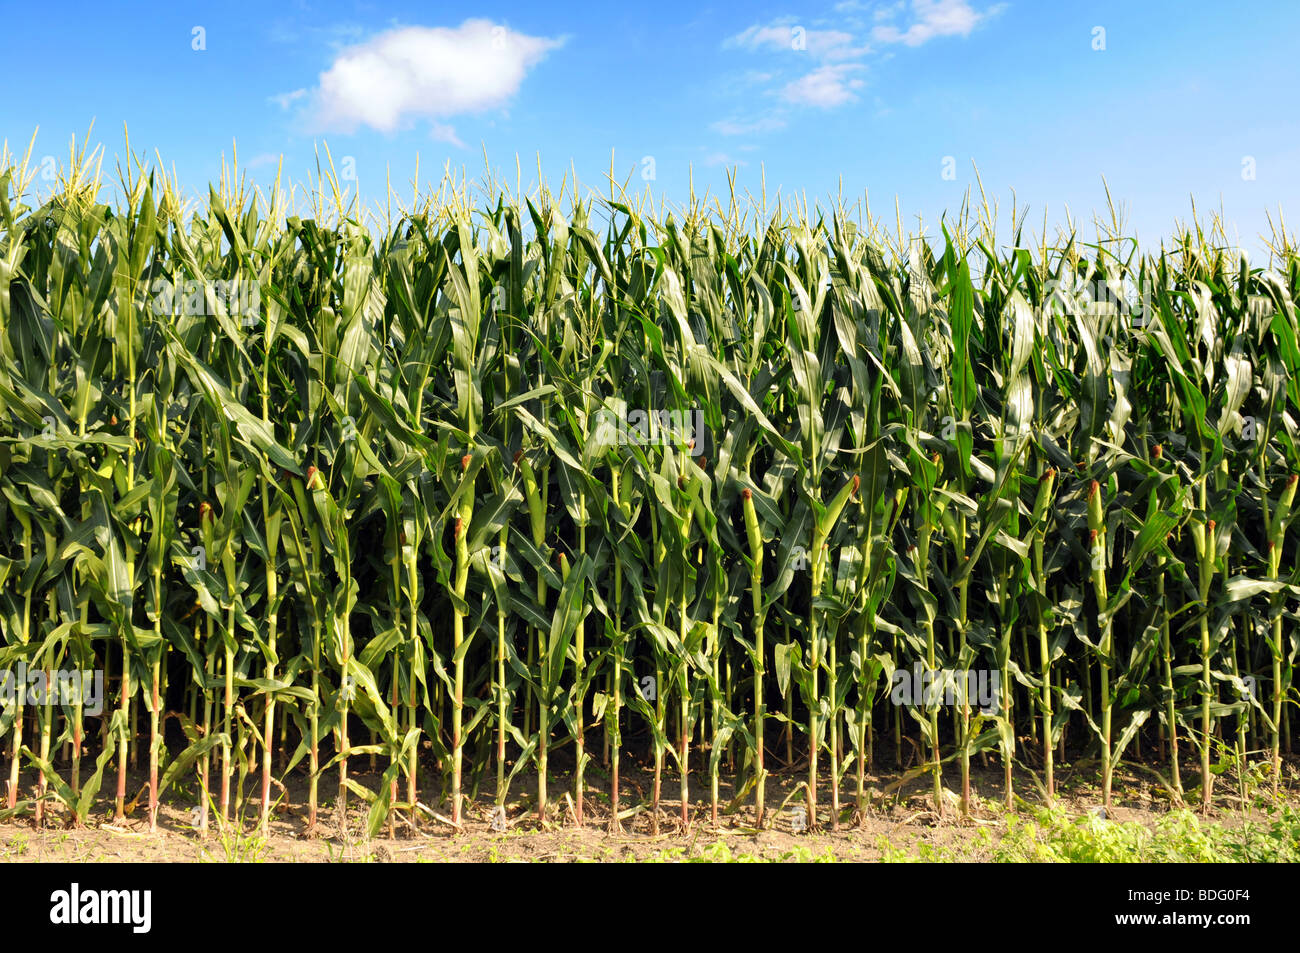 Cornfield during sunny day with blue sky and clouds Stock Photo